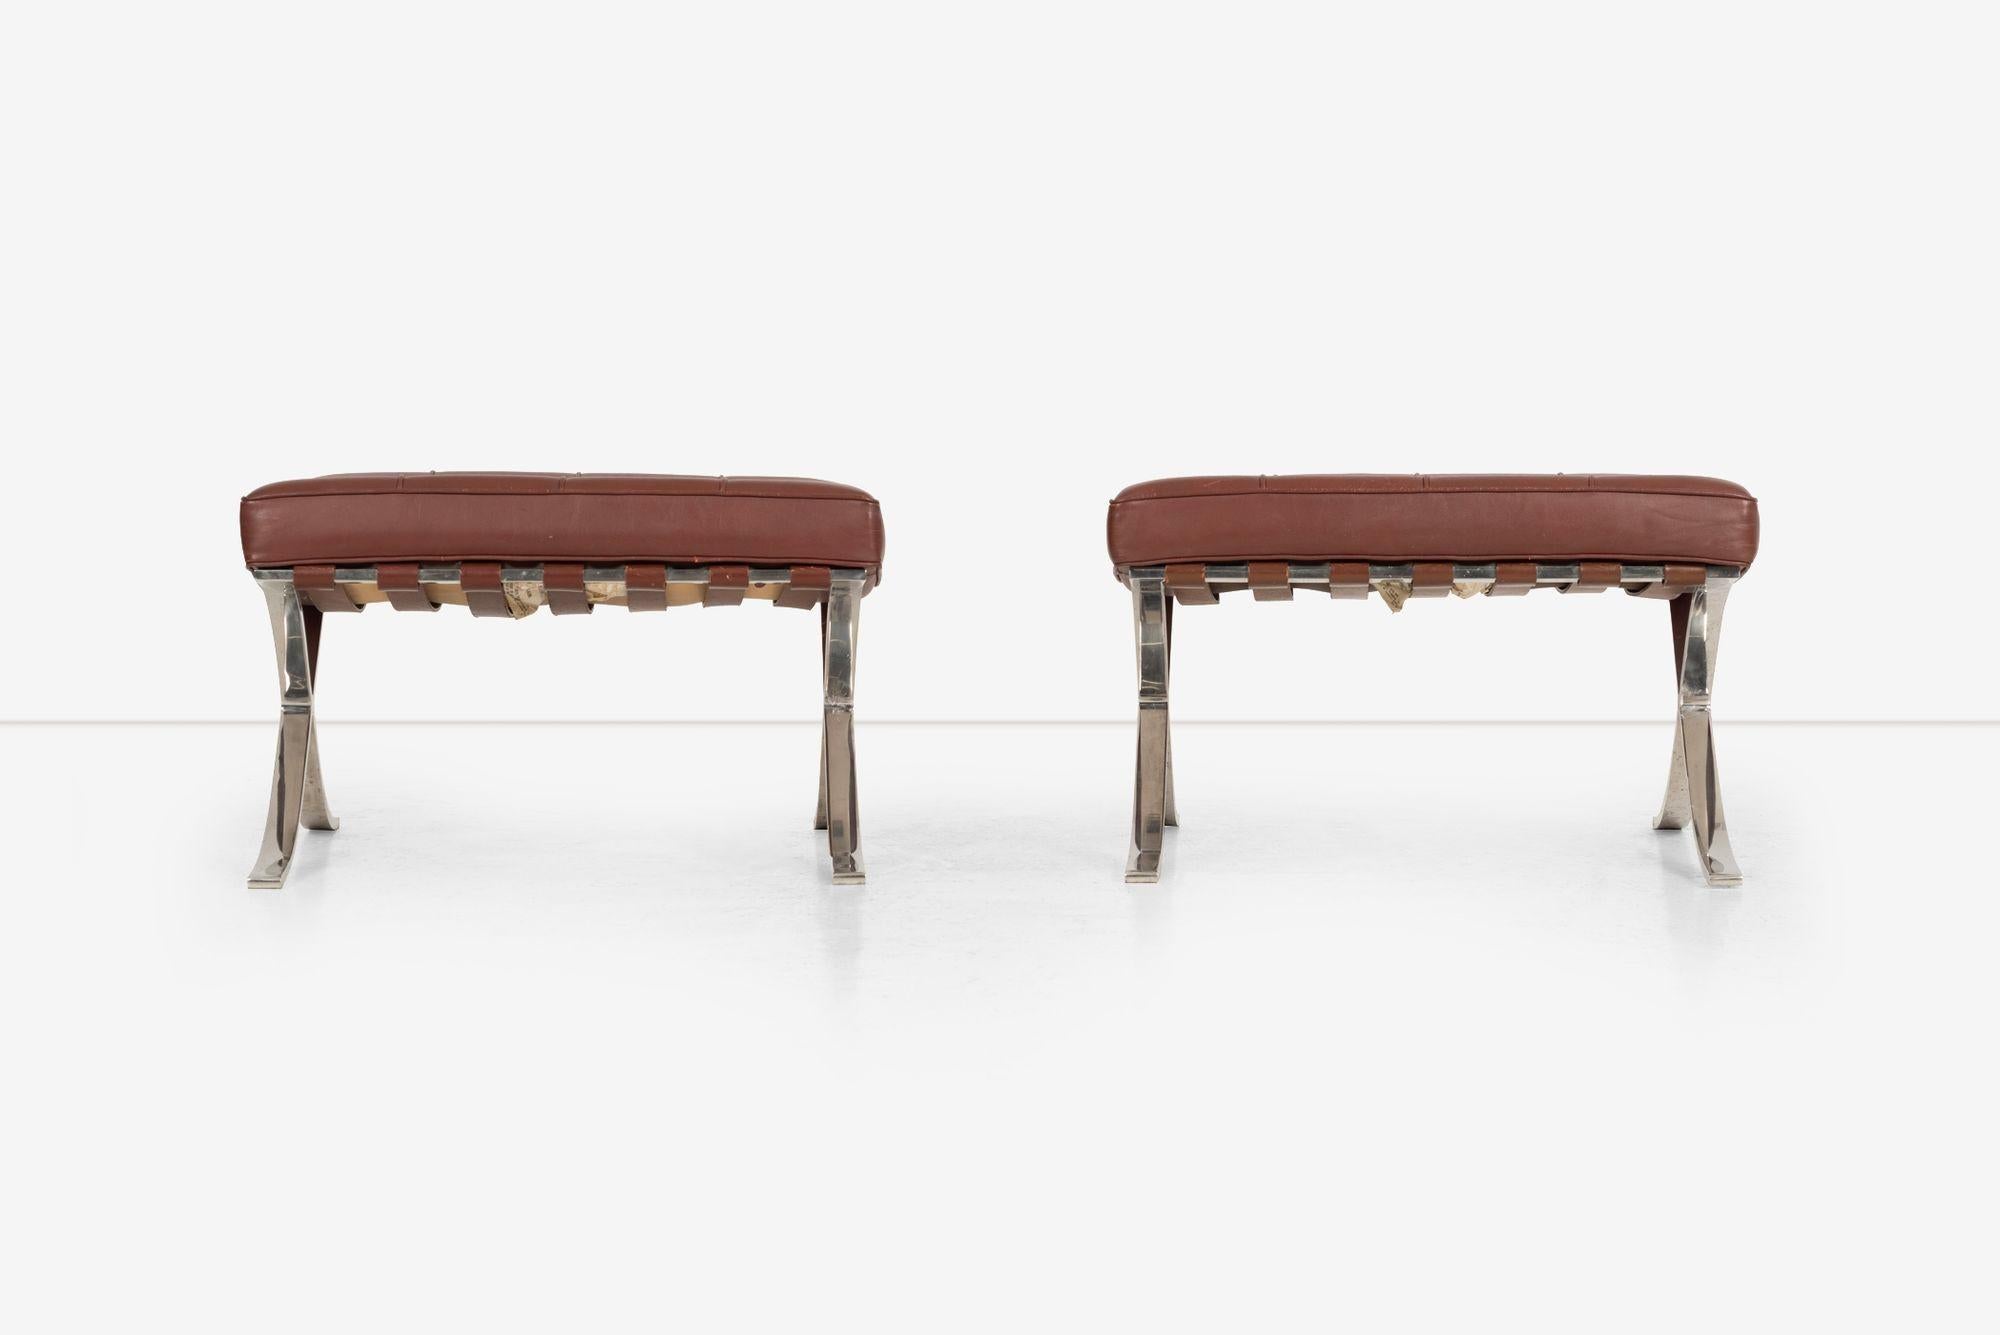 Pair of Mies van Der Rohe Barcelona Ottomans for Knoll International, Original Oxblood Leather, and straps with a stainless steel frame.
Featuring precise tufting, individual panels of leather are meticulously cut, hand-welted, and